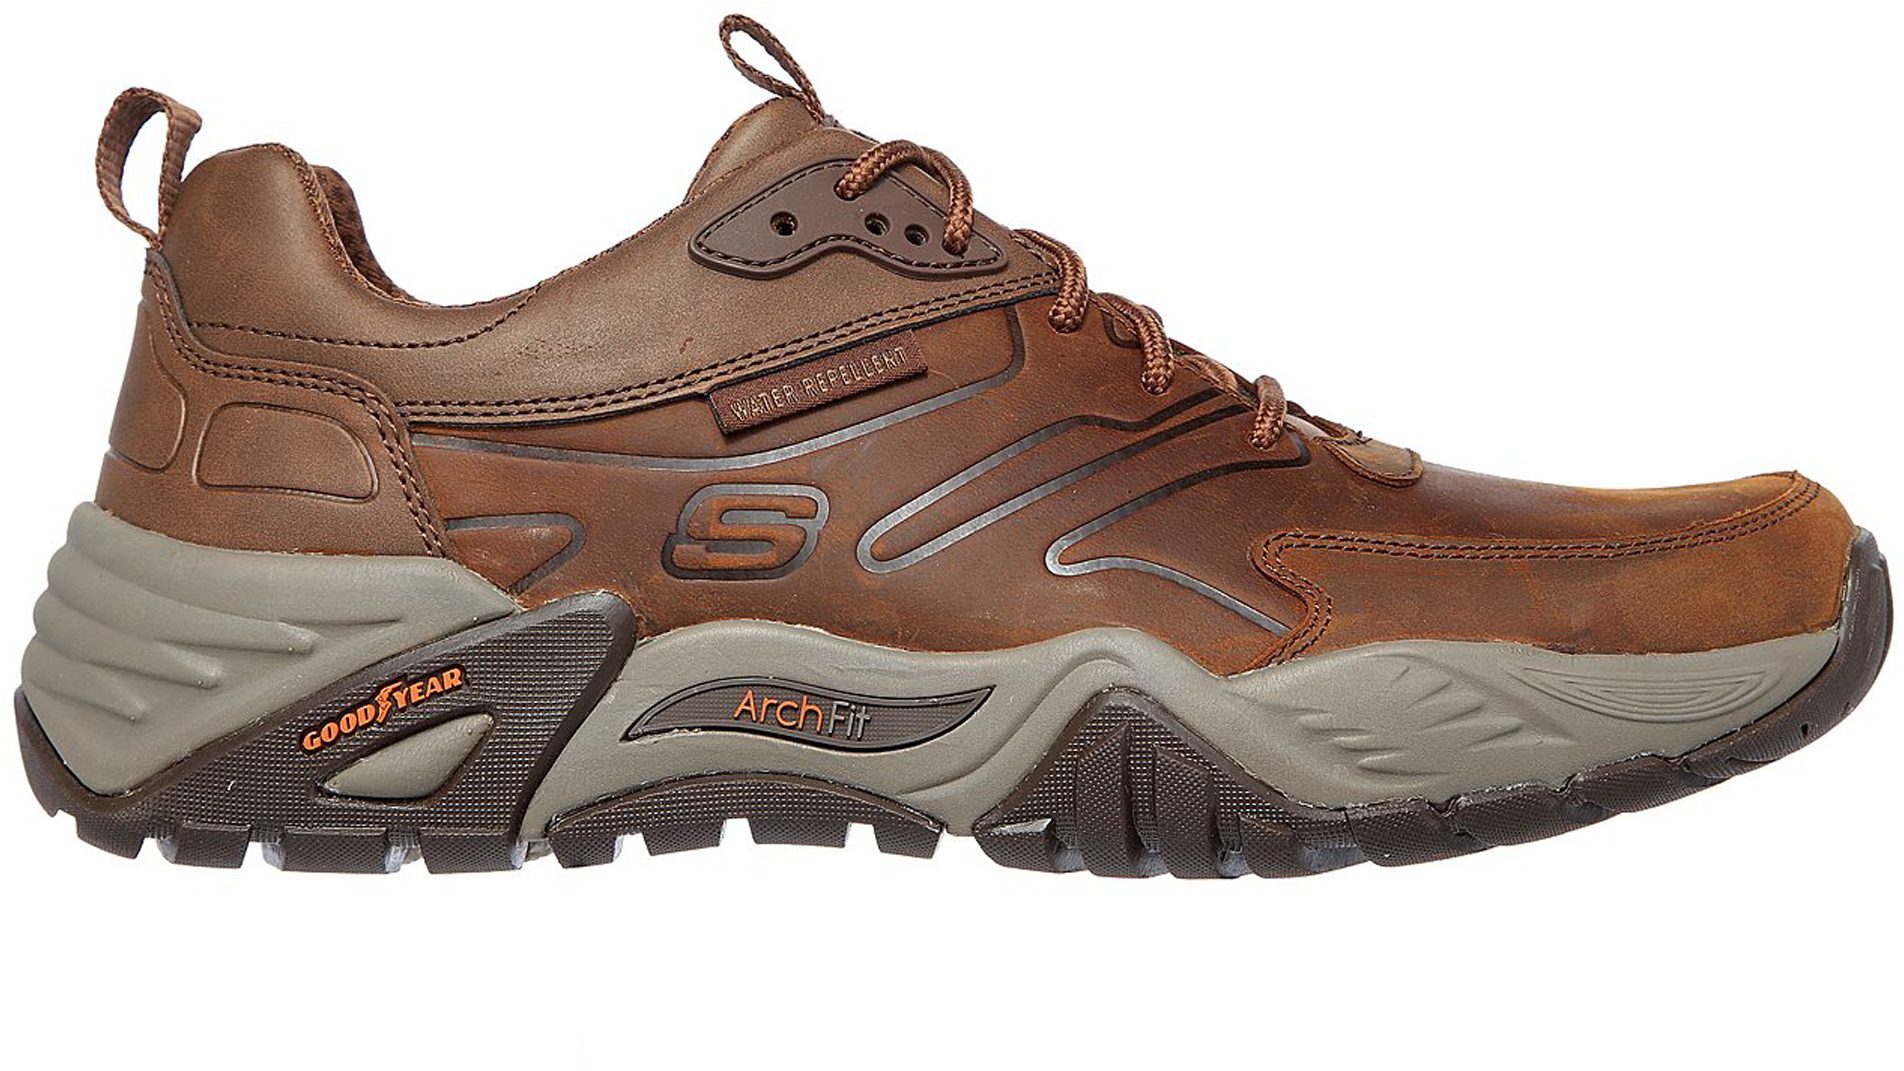 Skechers Arch Fit Recon - Cadell Brown 204409 CDB - Casual Shoes ...